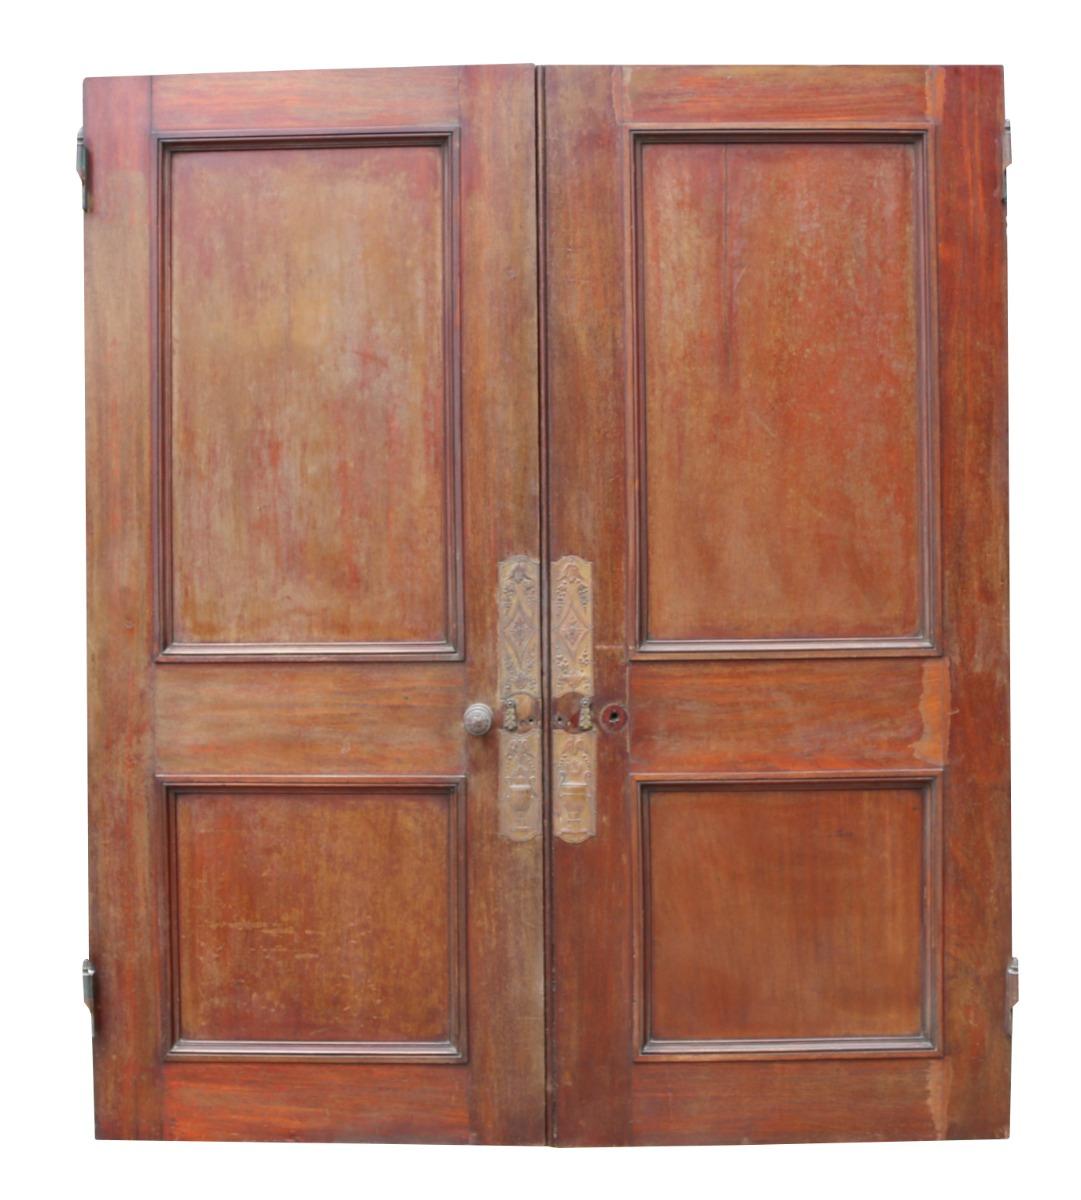 A set of high quality Regency Period mahogany interior doors. These doors were reclaimed from Broome Court, now demolished.